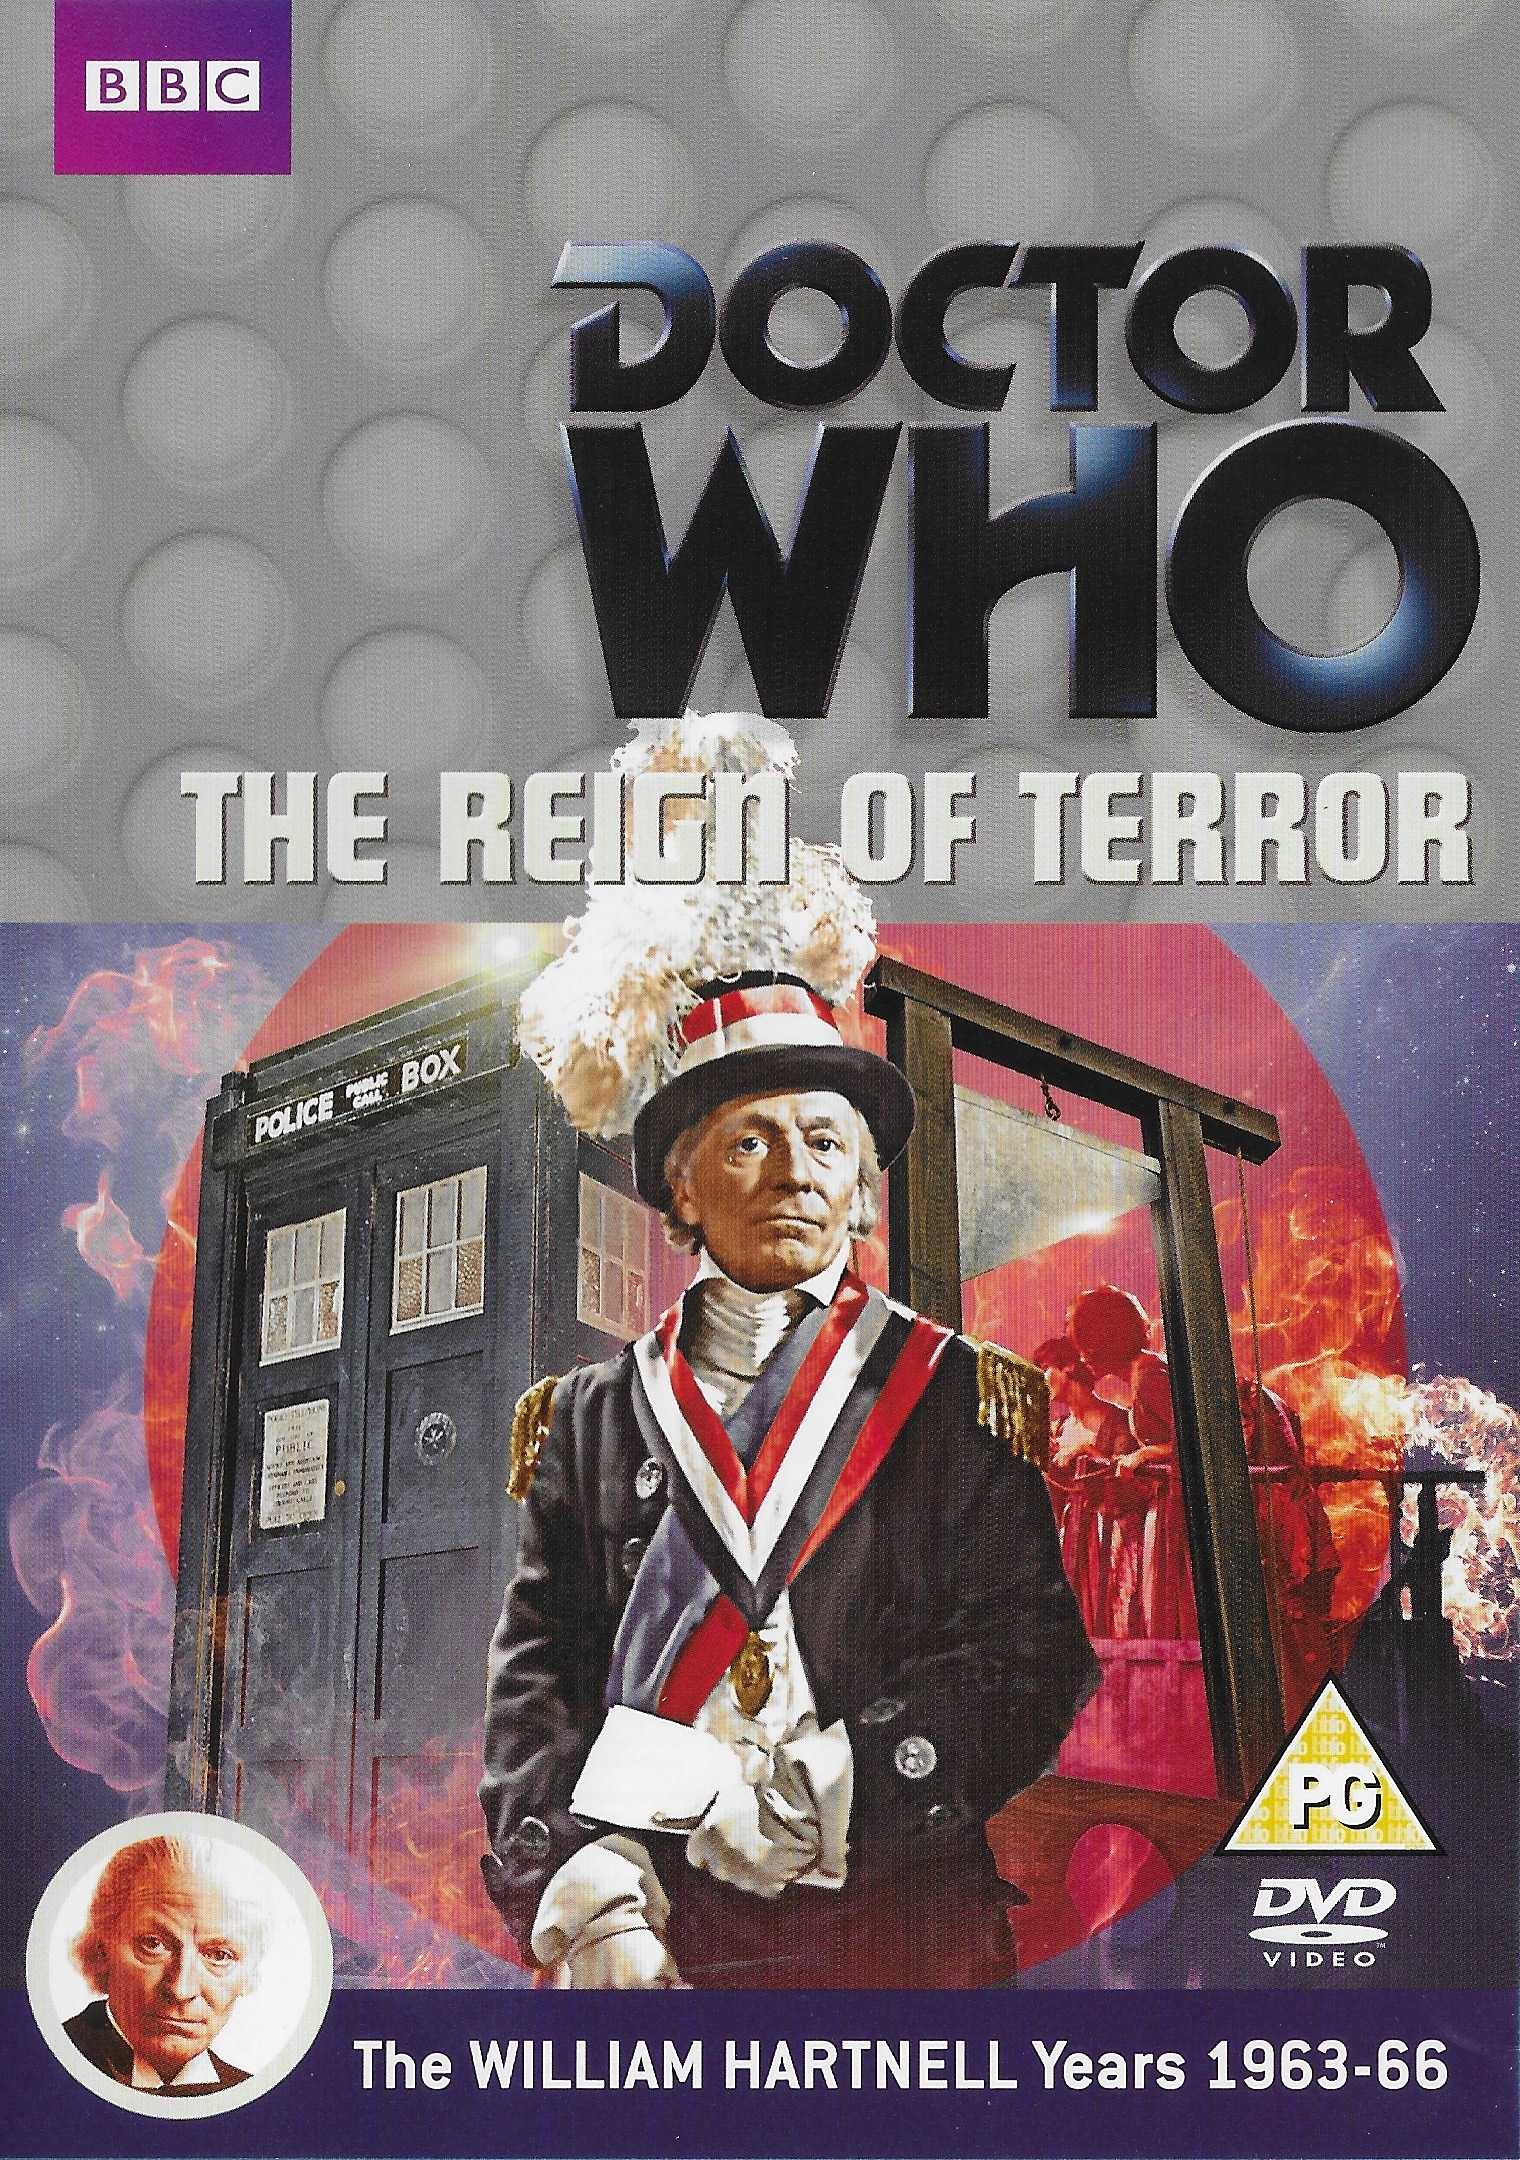 Picture of BBCDVD 3528 Doctor Who - The reign of terror by artist Dennis Spooner from the BBC records and Tapes library